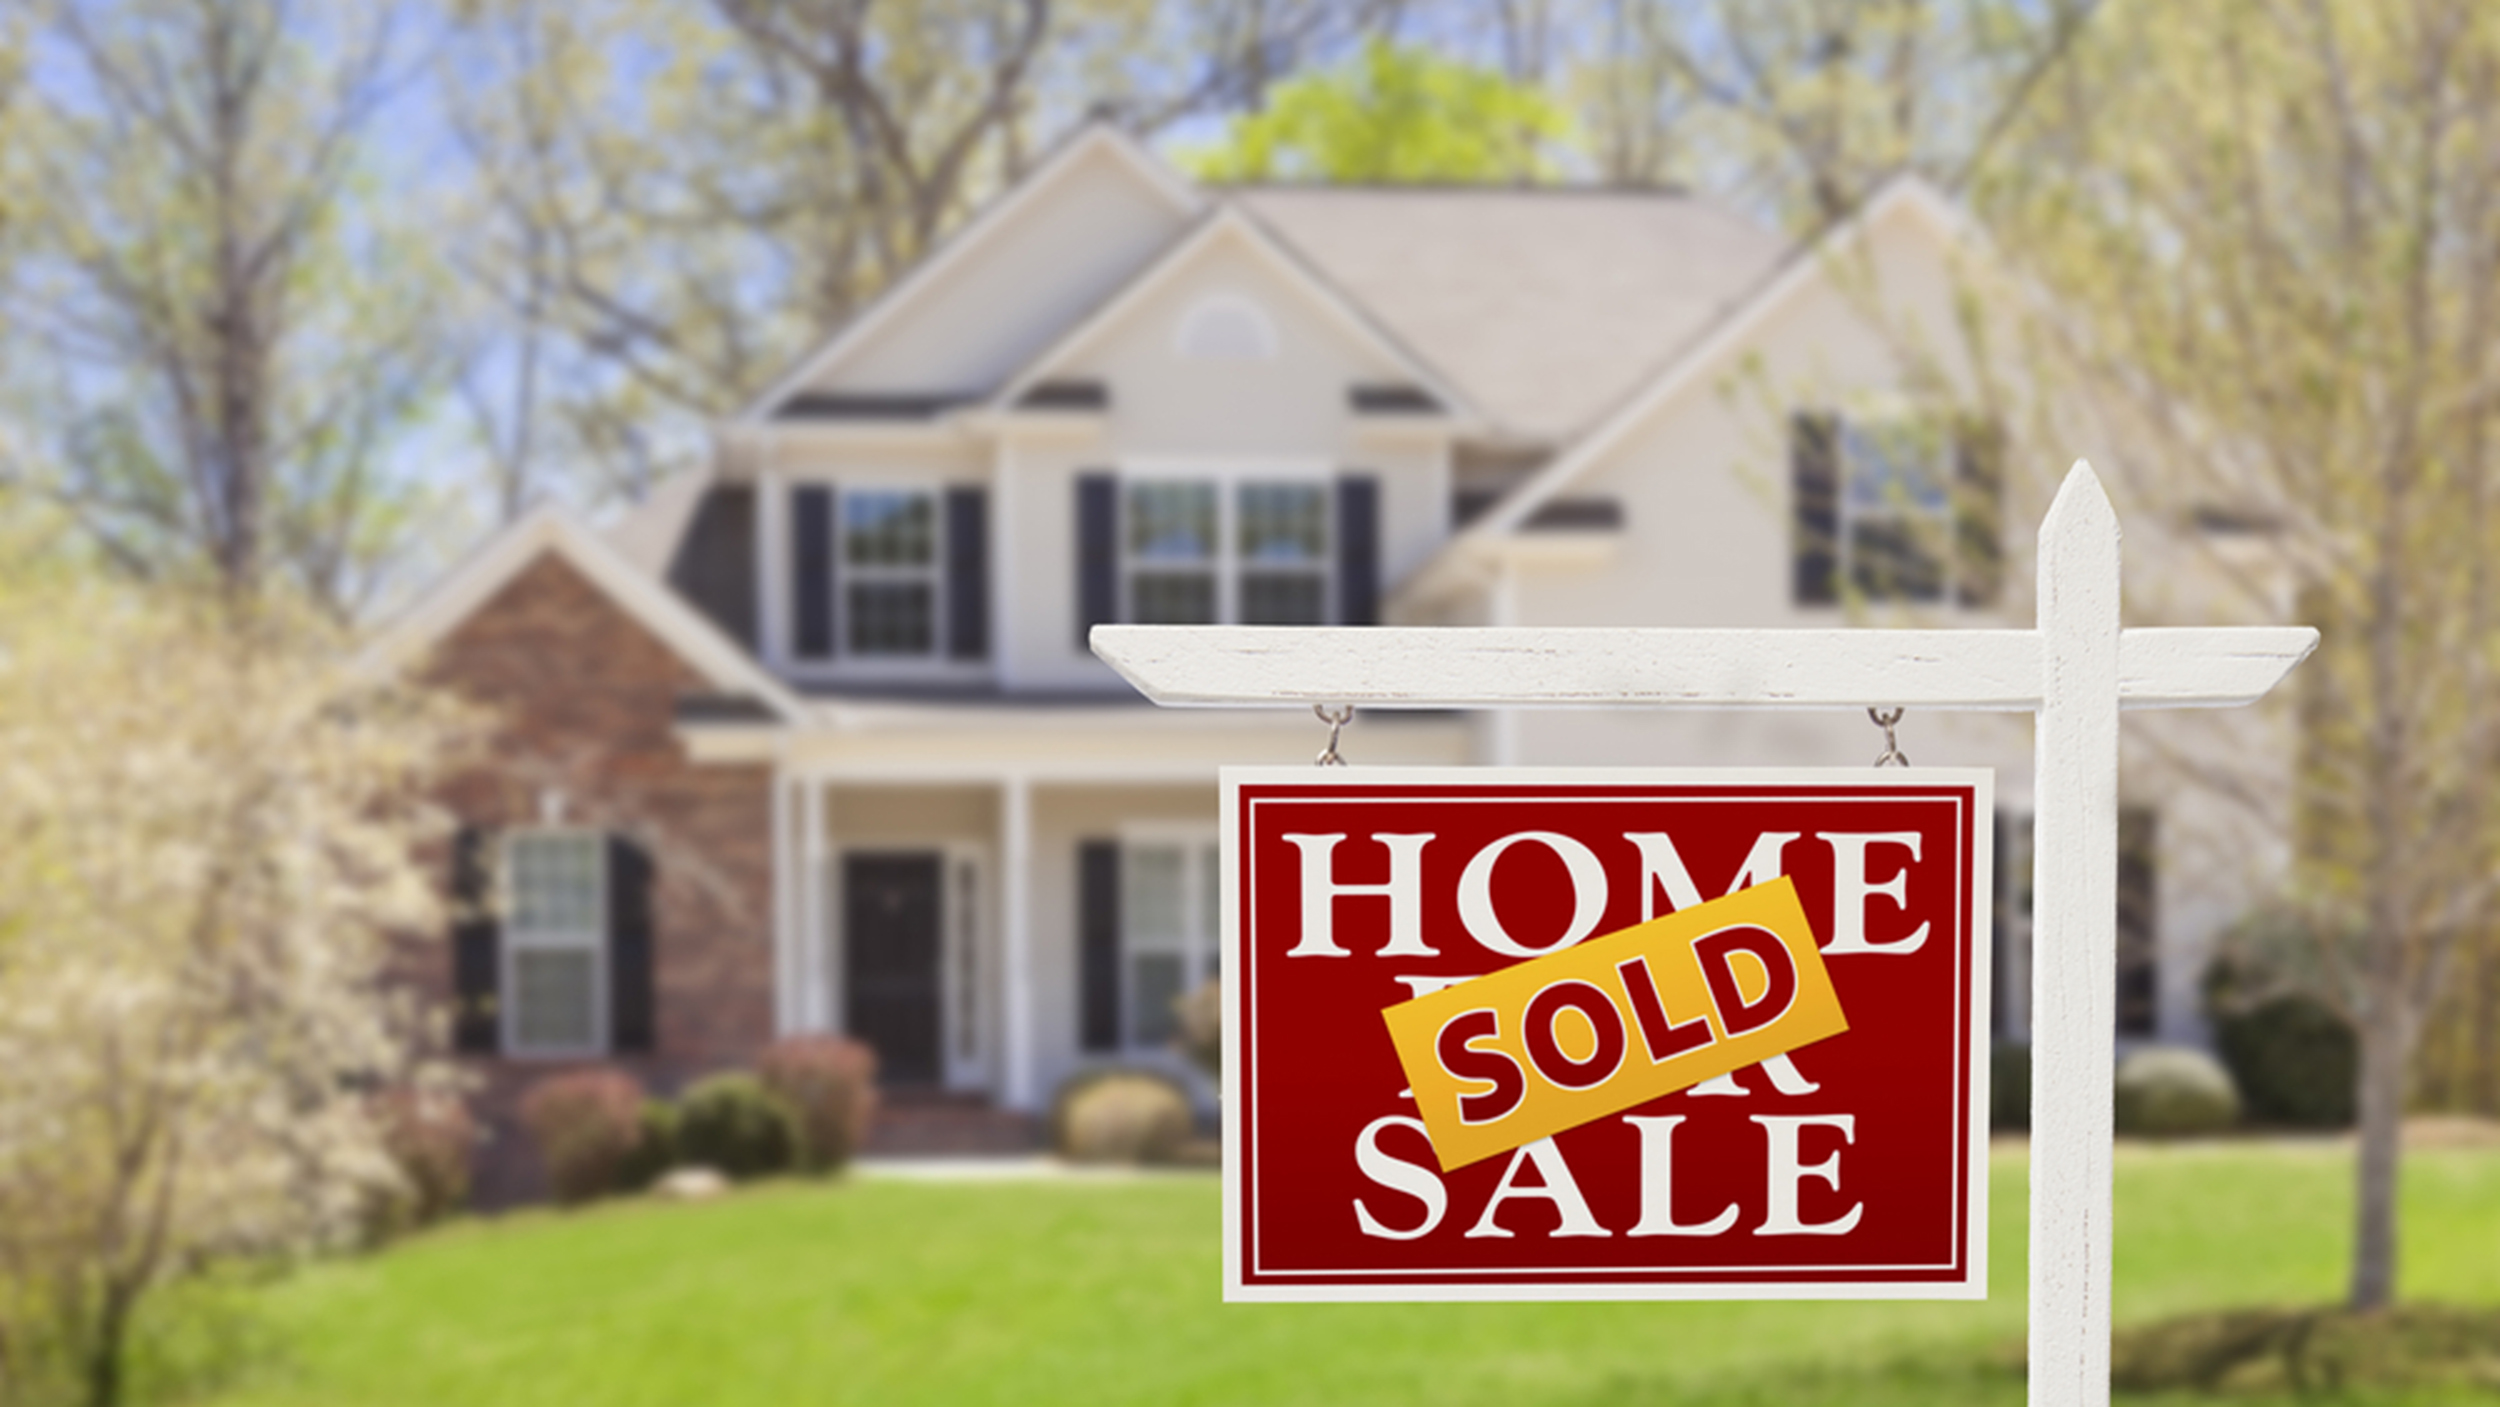 Real estate advice: What to know about buying or selling a home - TODAY.com